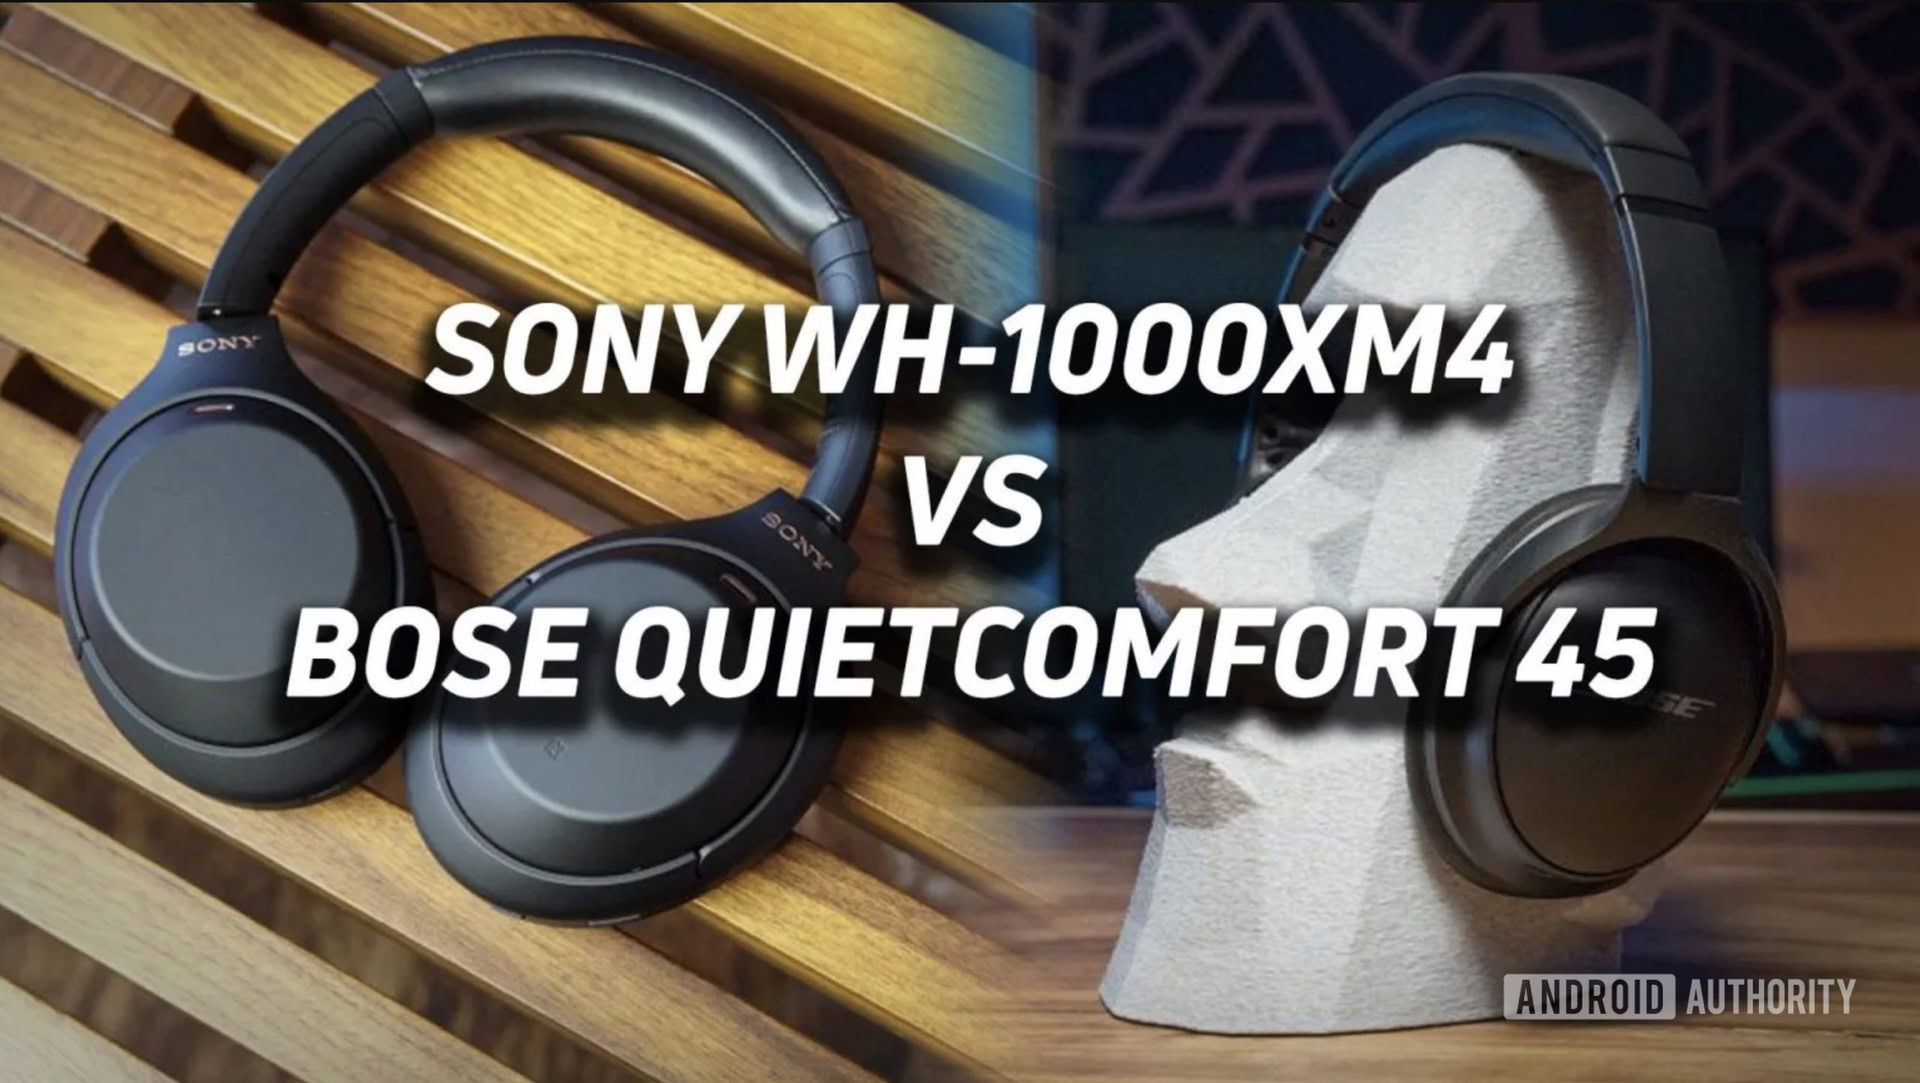 Sony WH-1000XM5 vs. Bose QuietComfort 45: Which Is Best?